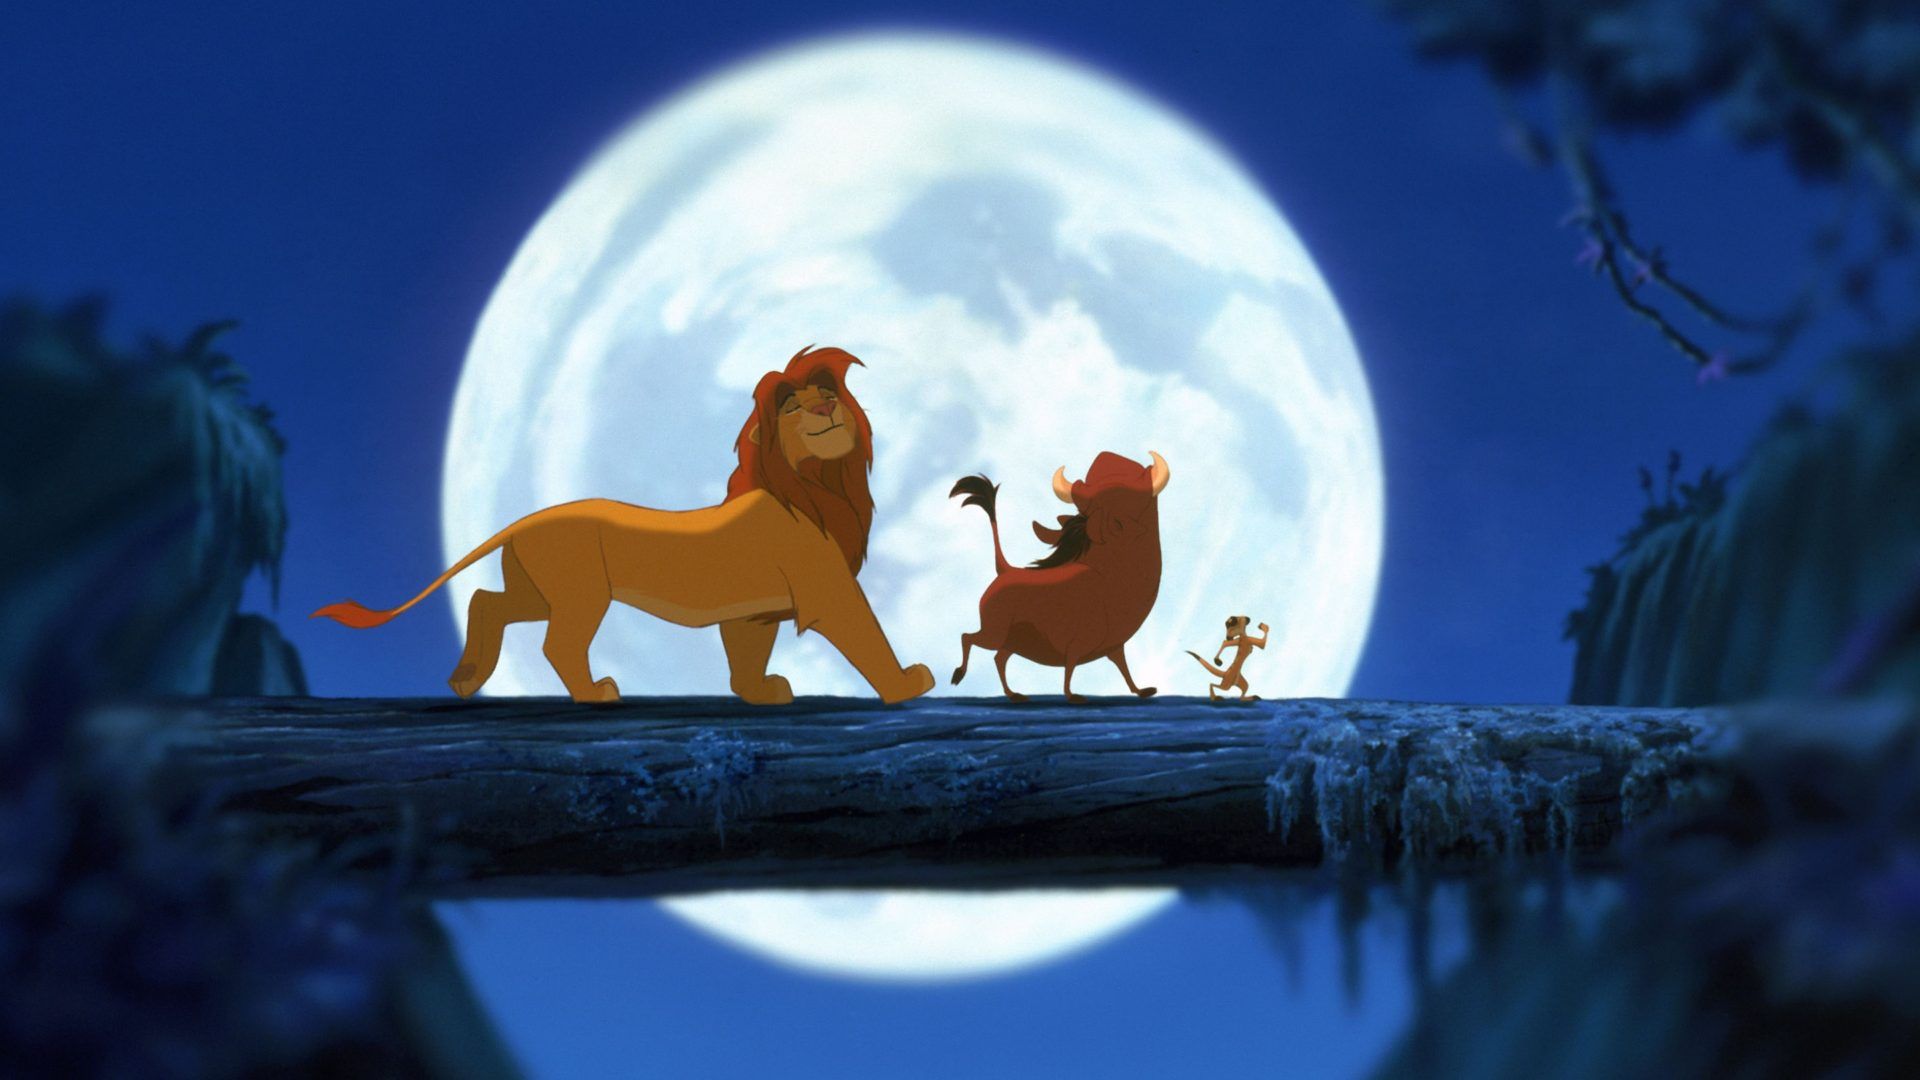 The lion king and his family are standing on a bridge - The Lion King, lion